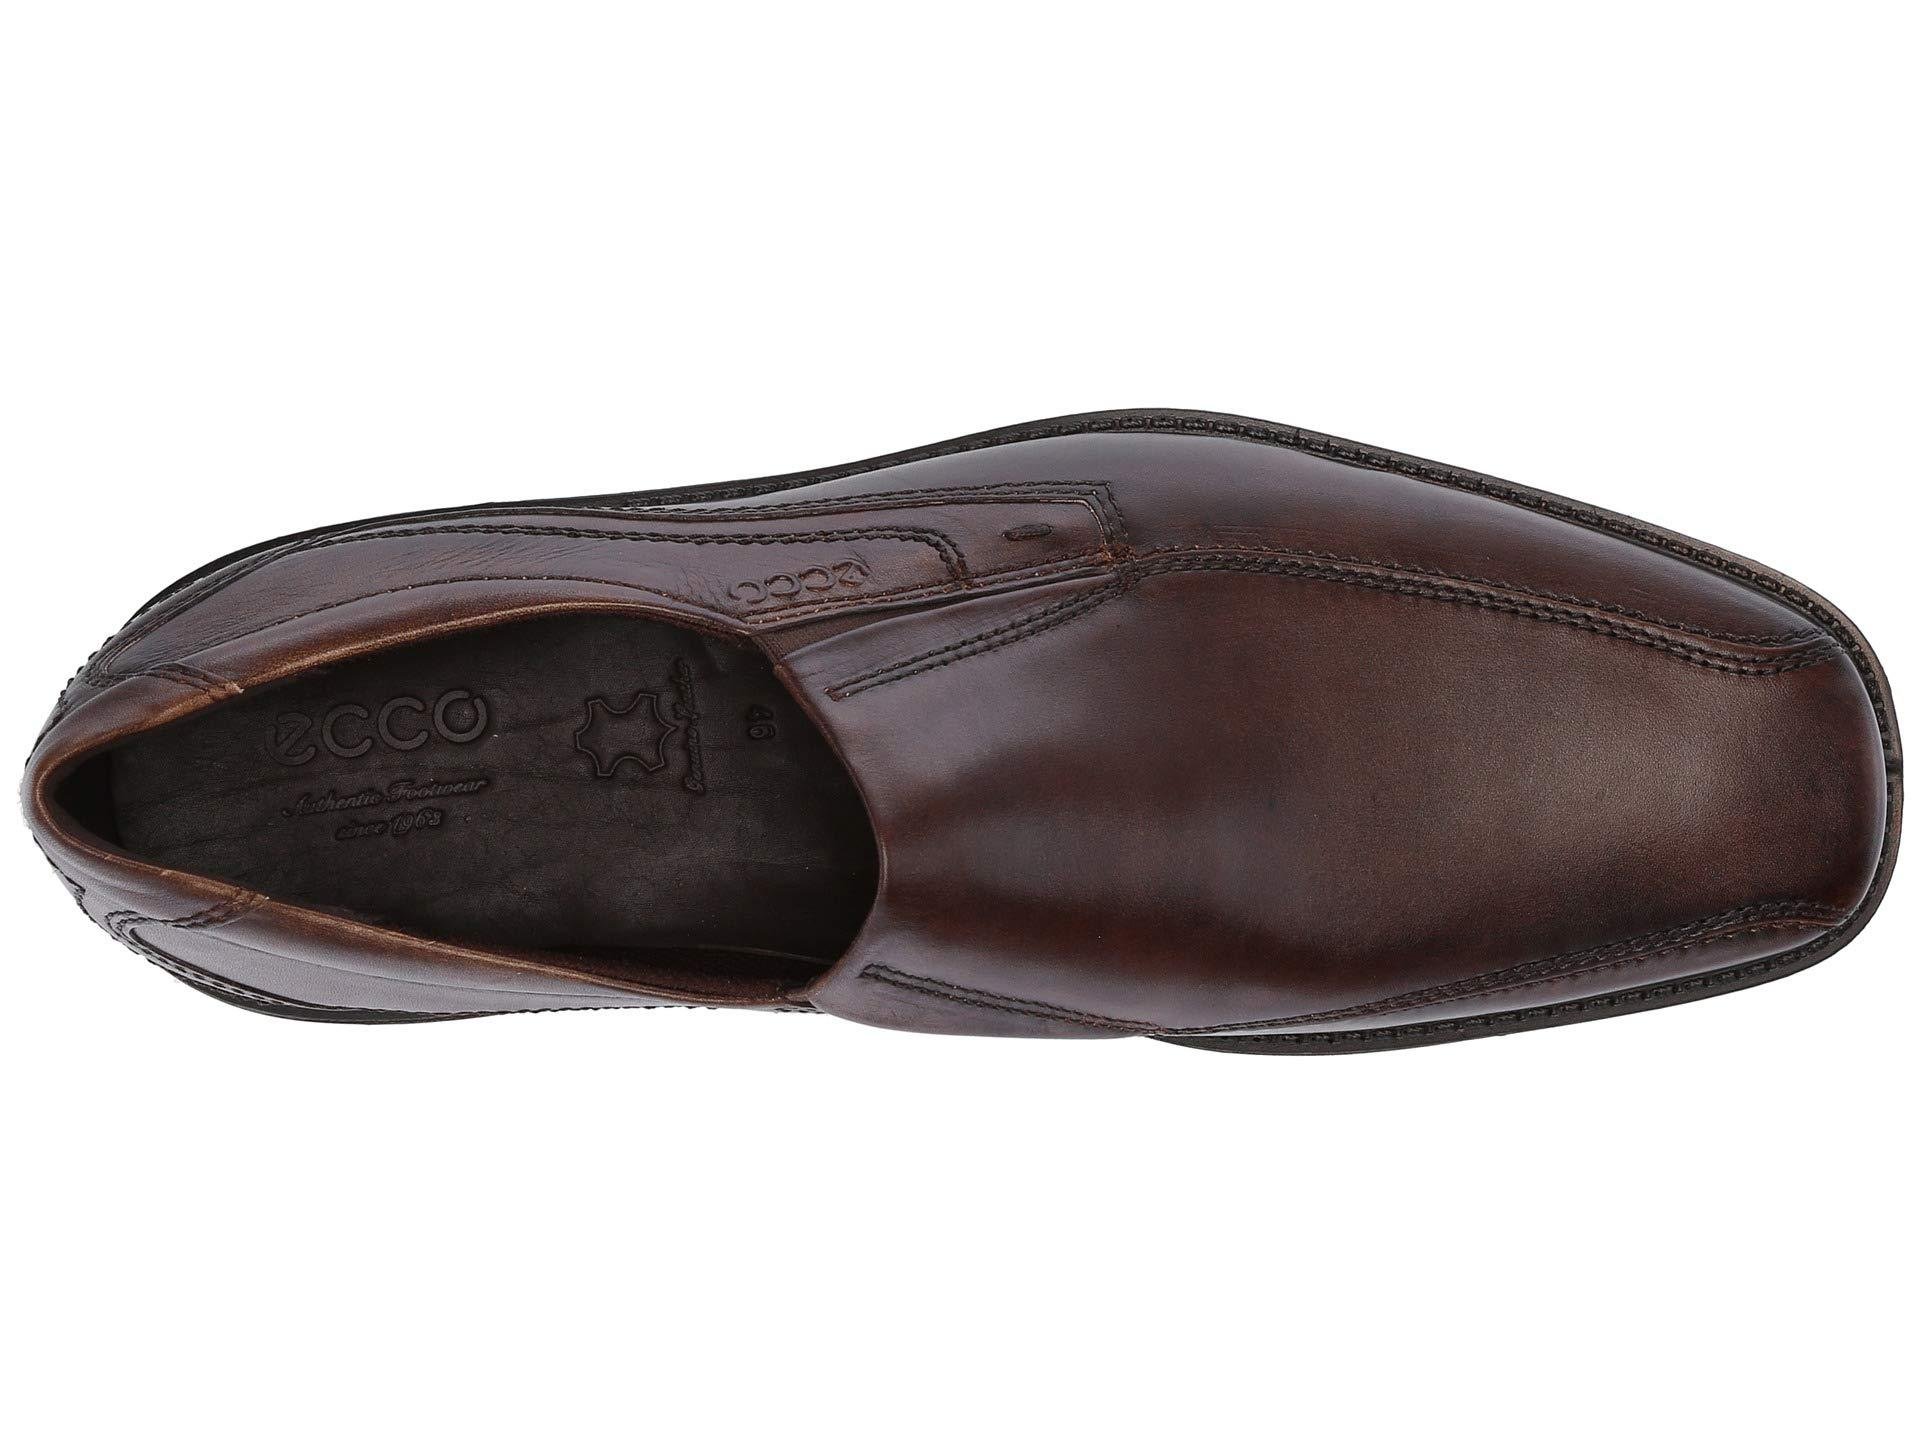 ecco men's new jersey loafer